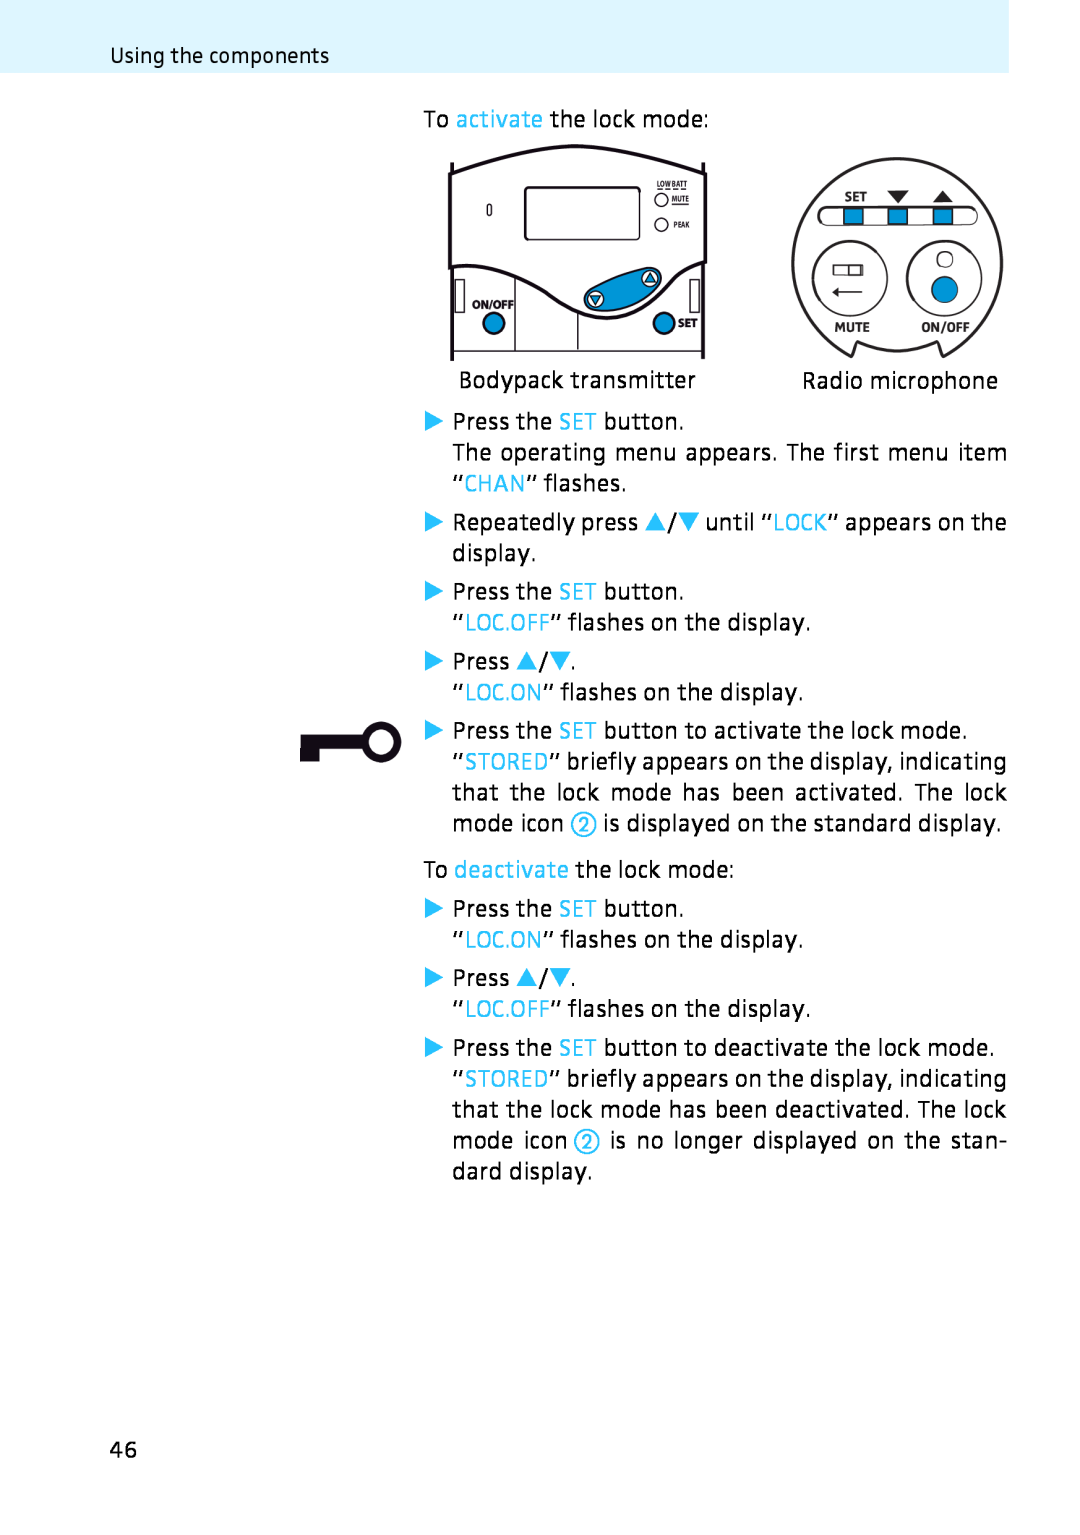 Sennheiser 2020 instruction manual To activate the lock mode 